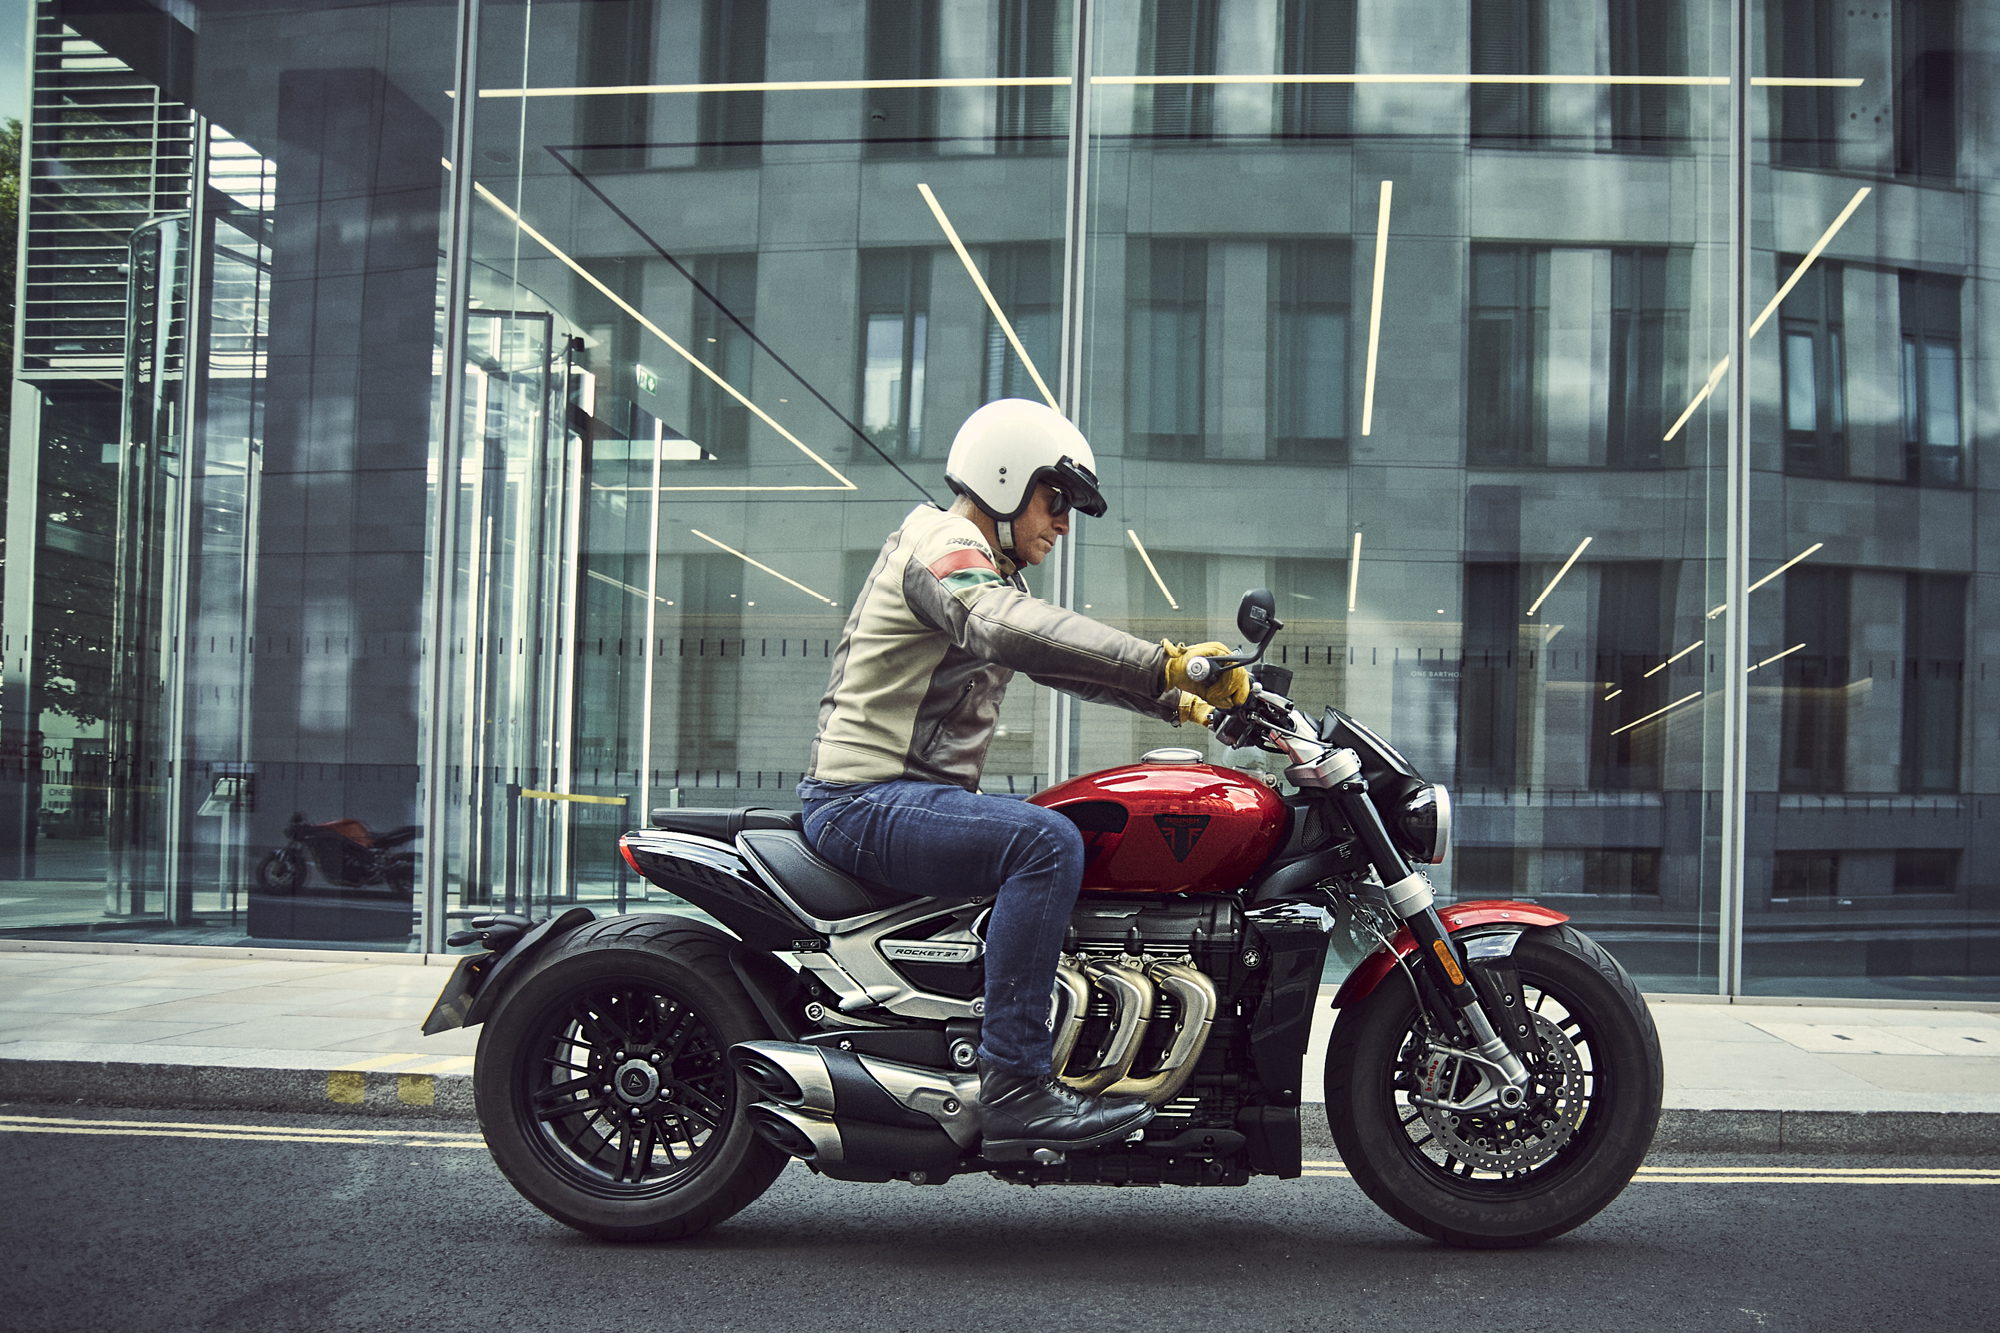 A week in London with Triumph Motorcycles' Bobber and Rocket 3 - Brummell